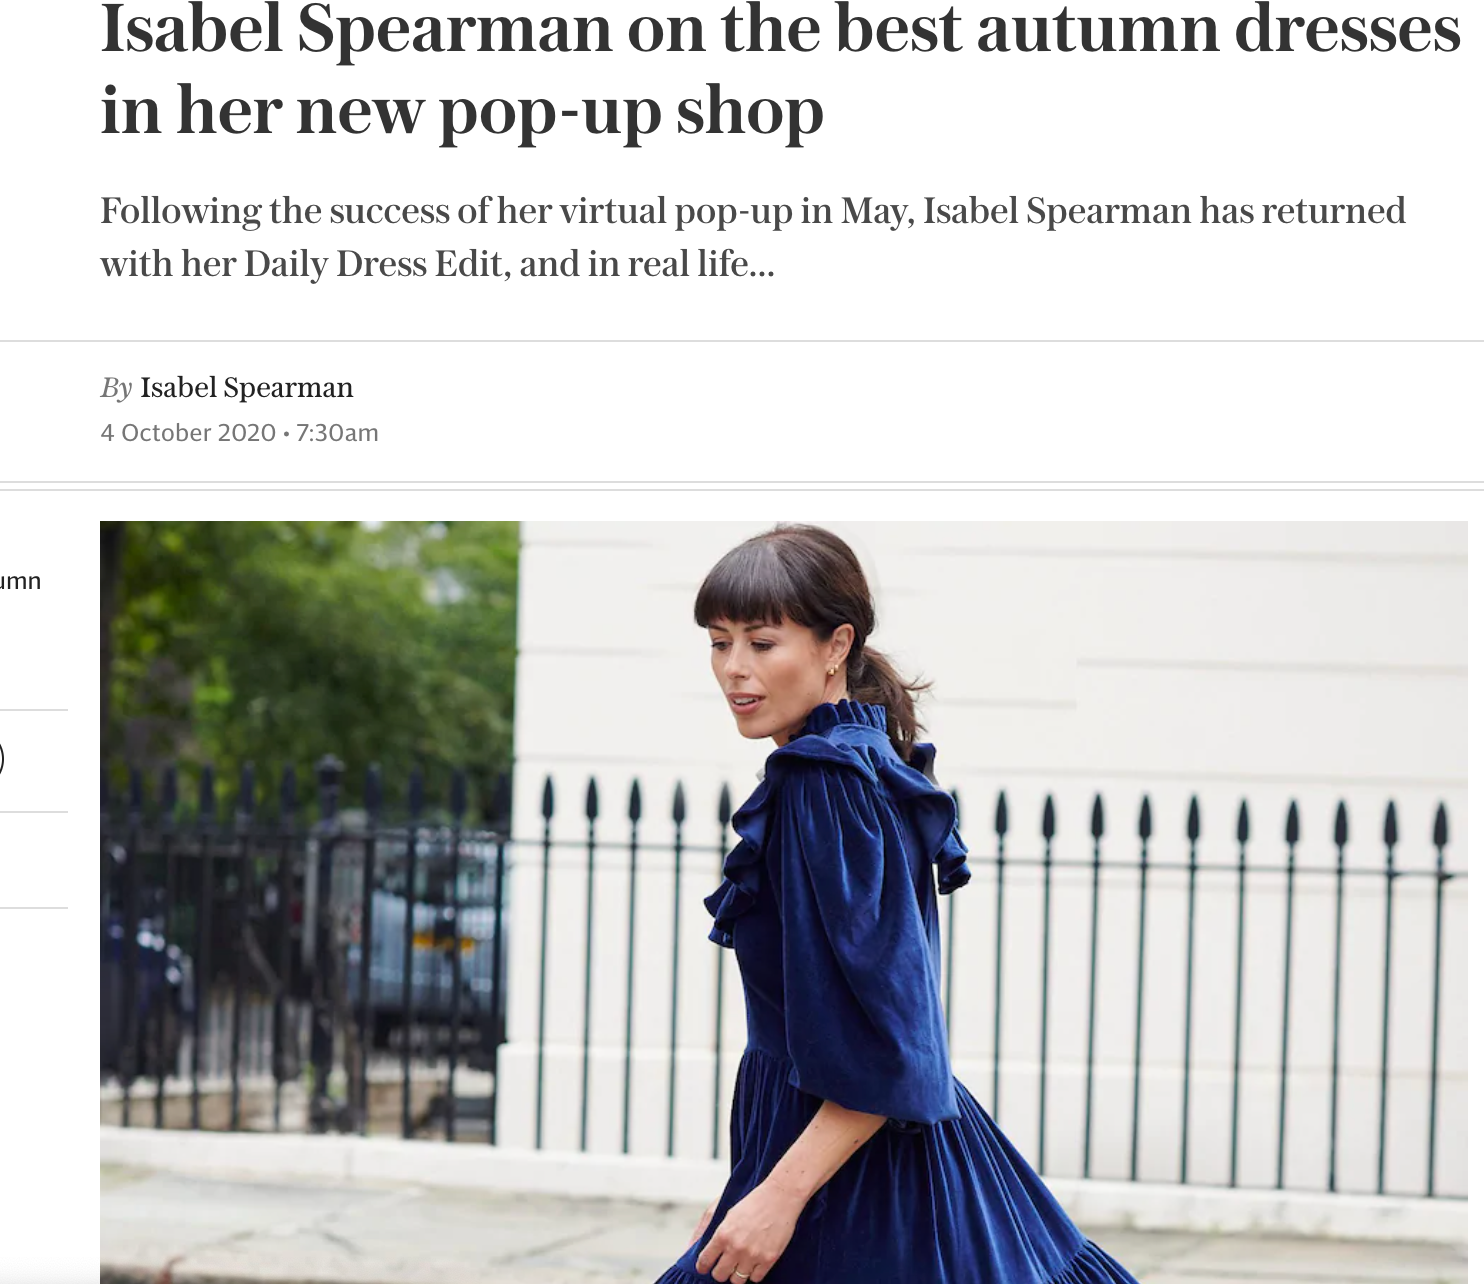 Isabel Spearman on the best autumn dresses in her new shop